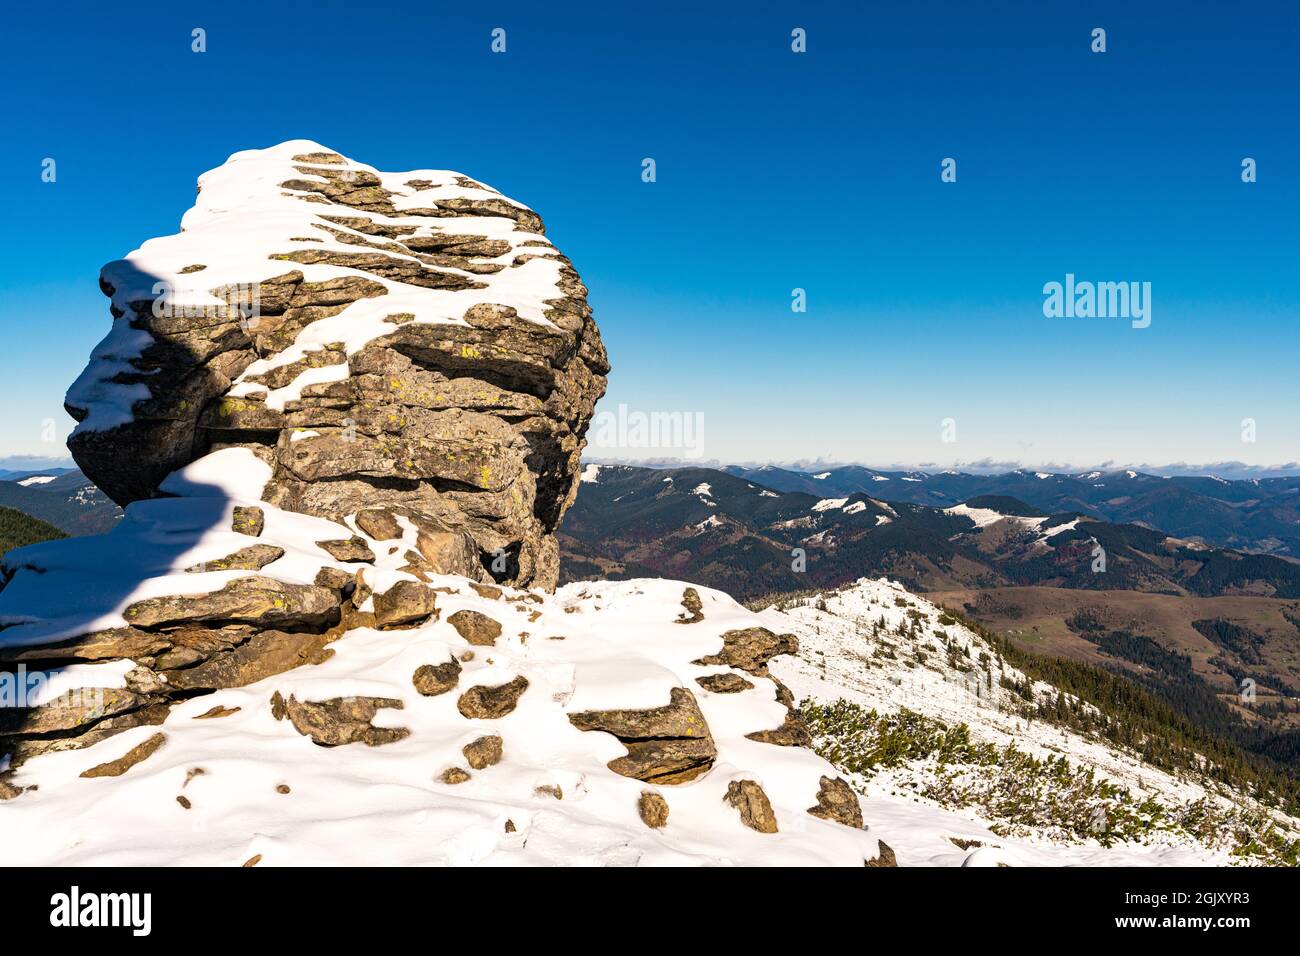 Landscapes of the Carpathian Mountains, covered with large stone ledges in Ukraine, near the village of Dzembronya Stock Photo